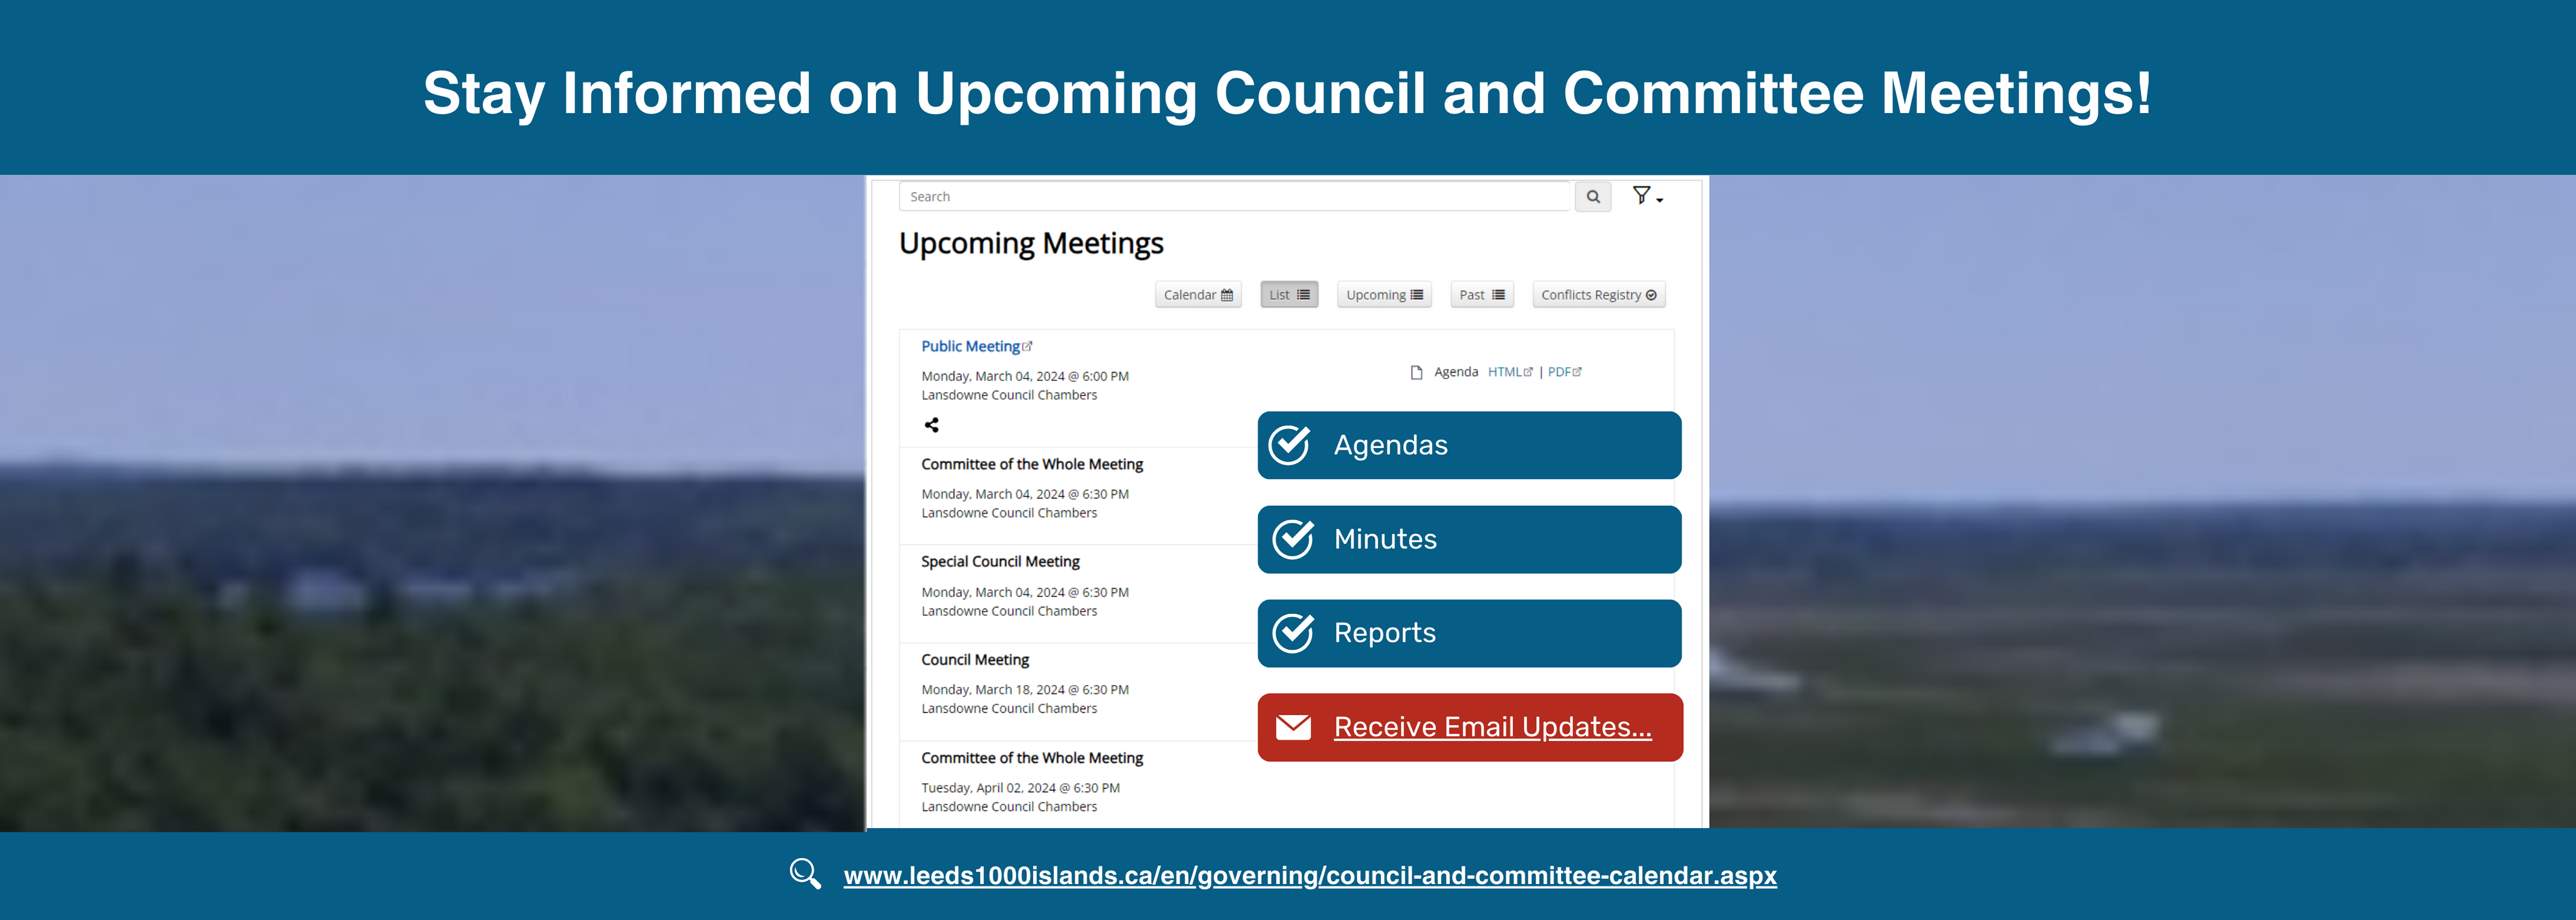 Stay informed on upcoming council and committee meetings